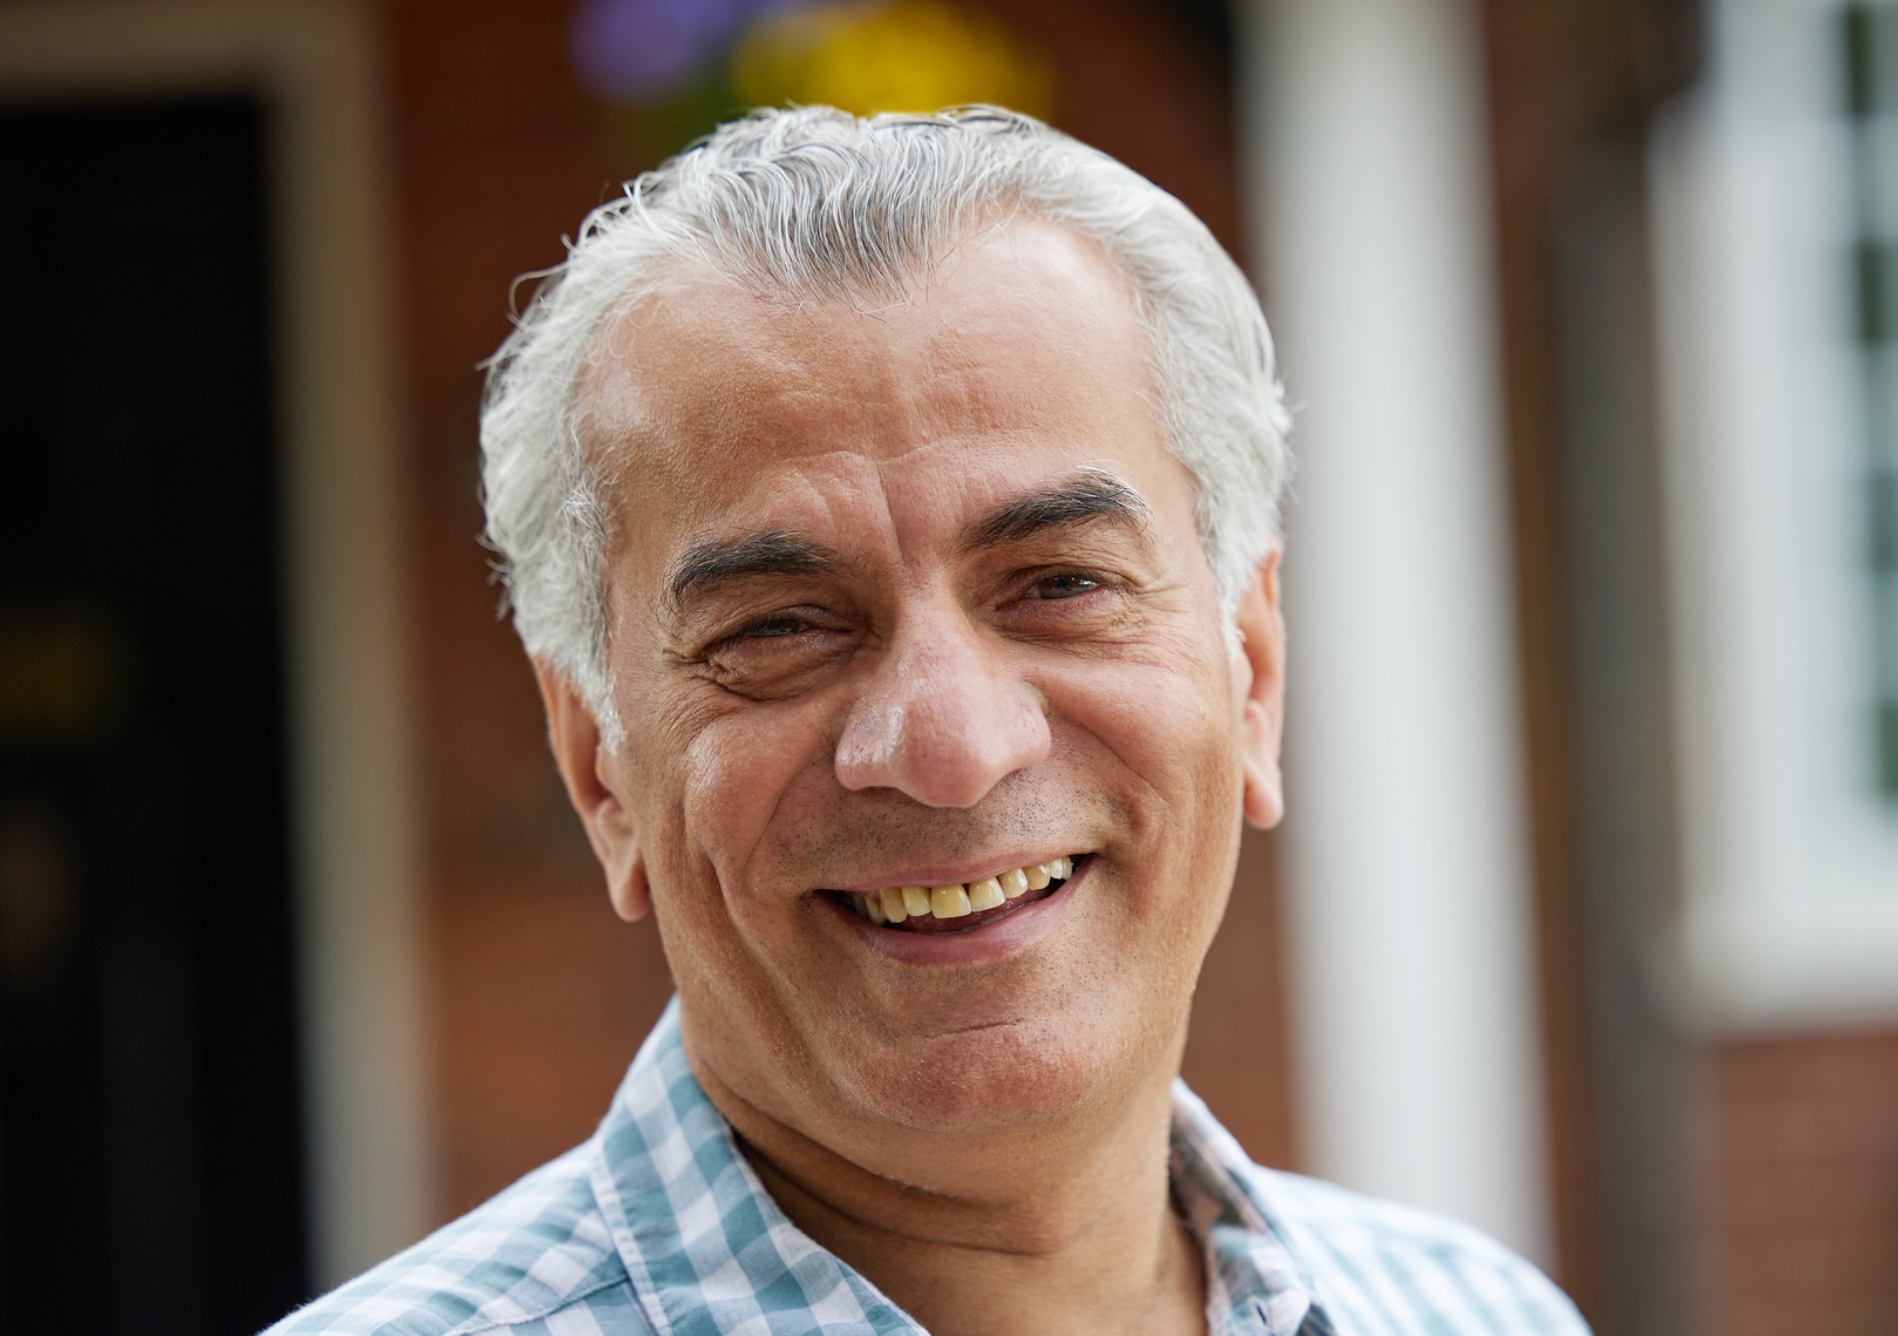 the photo shows an older man with dark eyes and grey hair standing outside and smiling at the camera